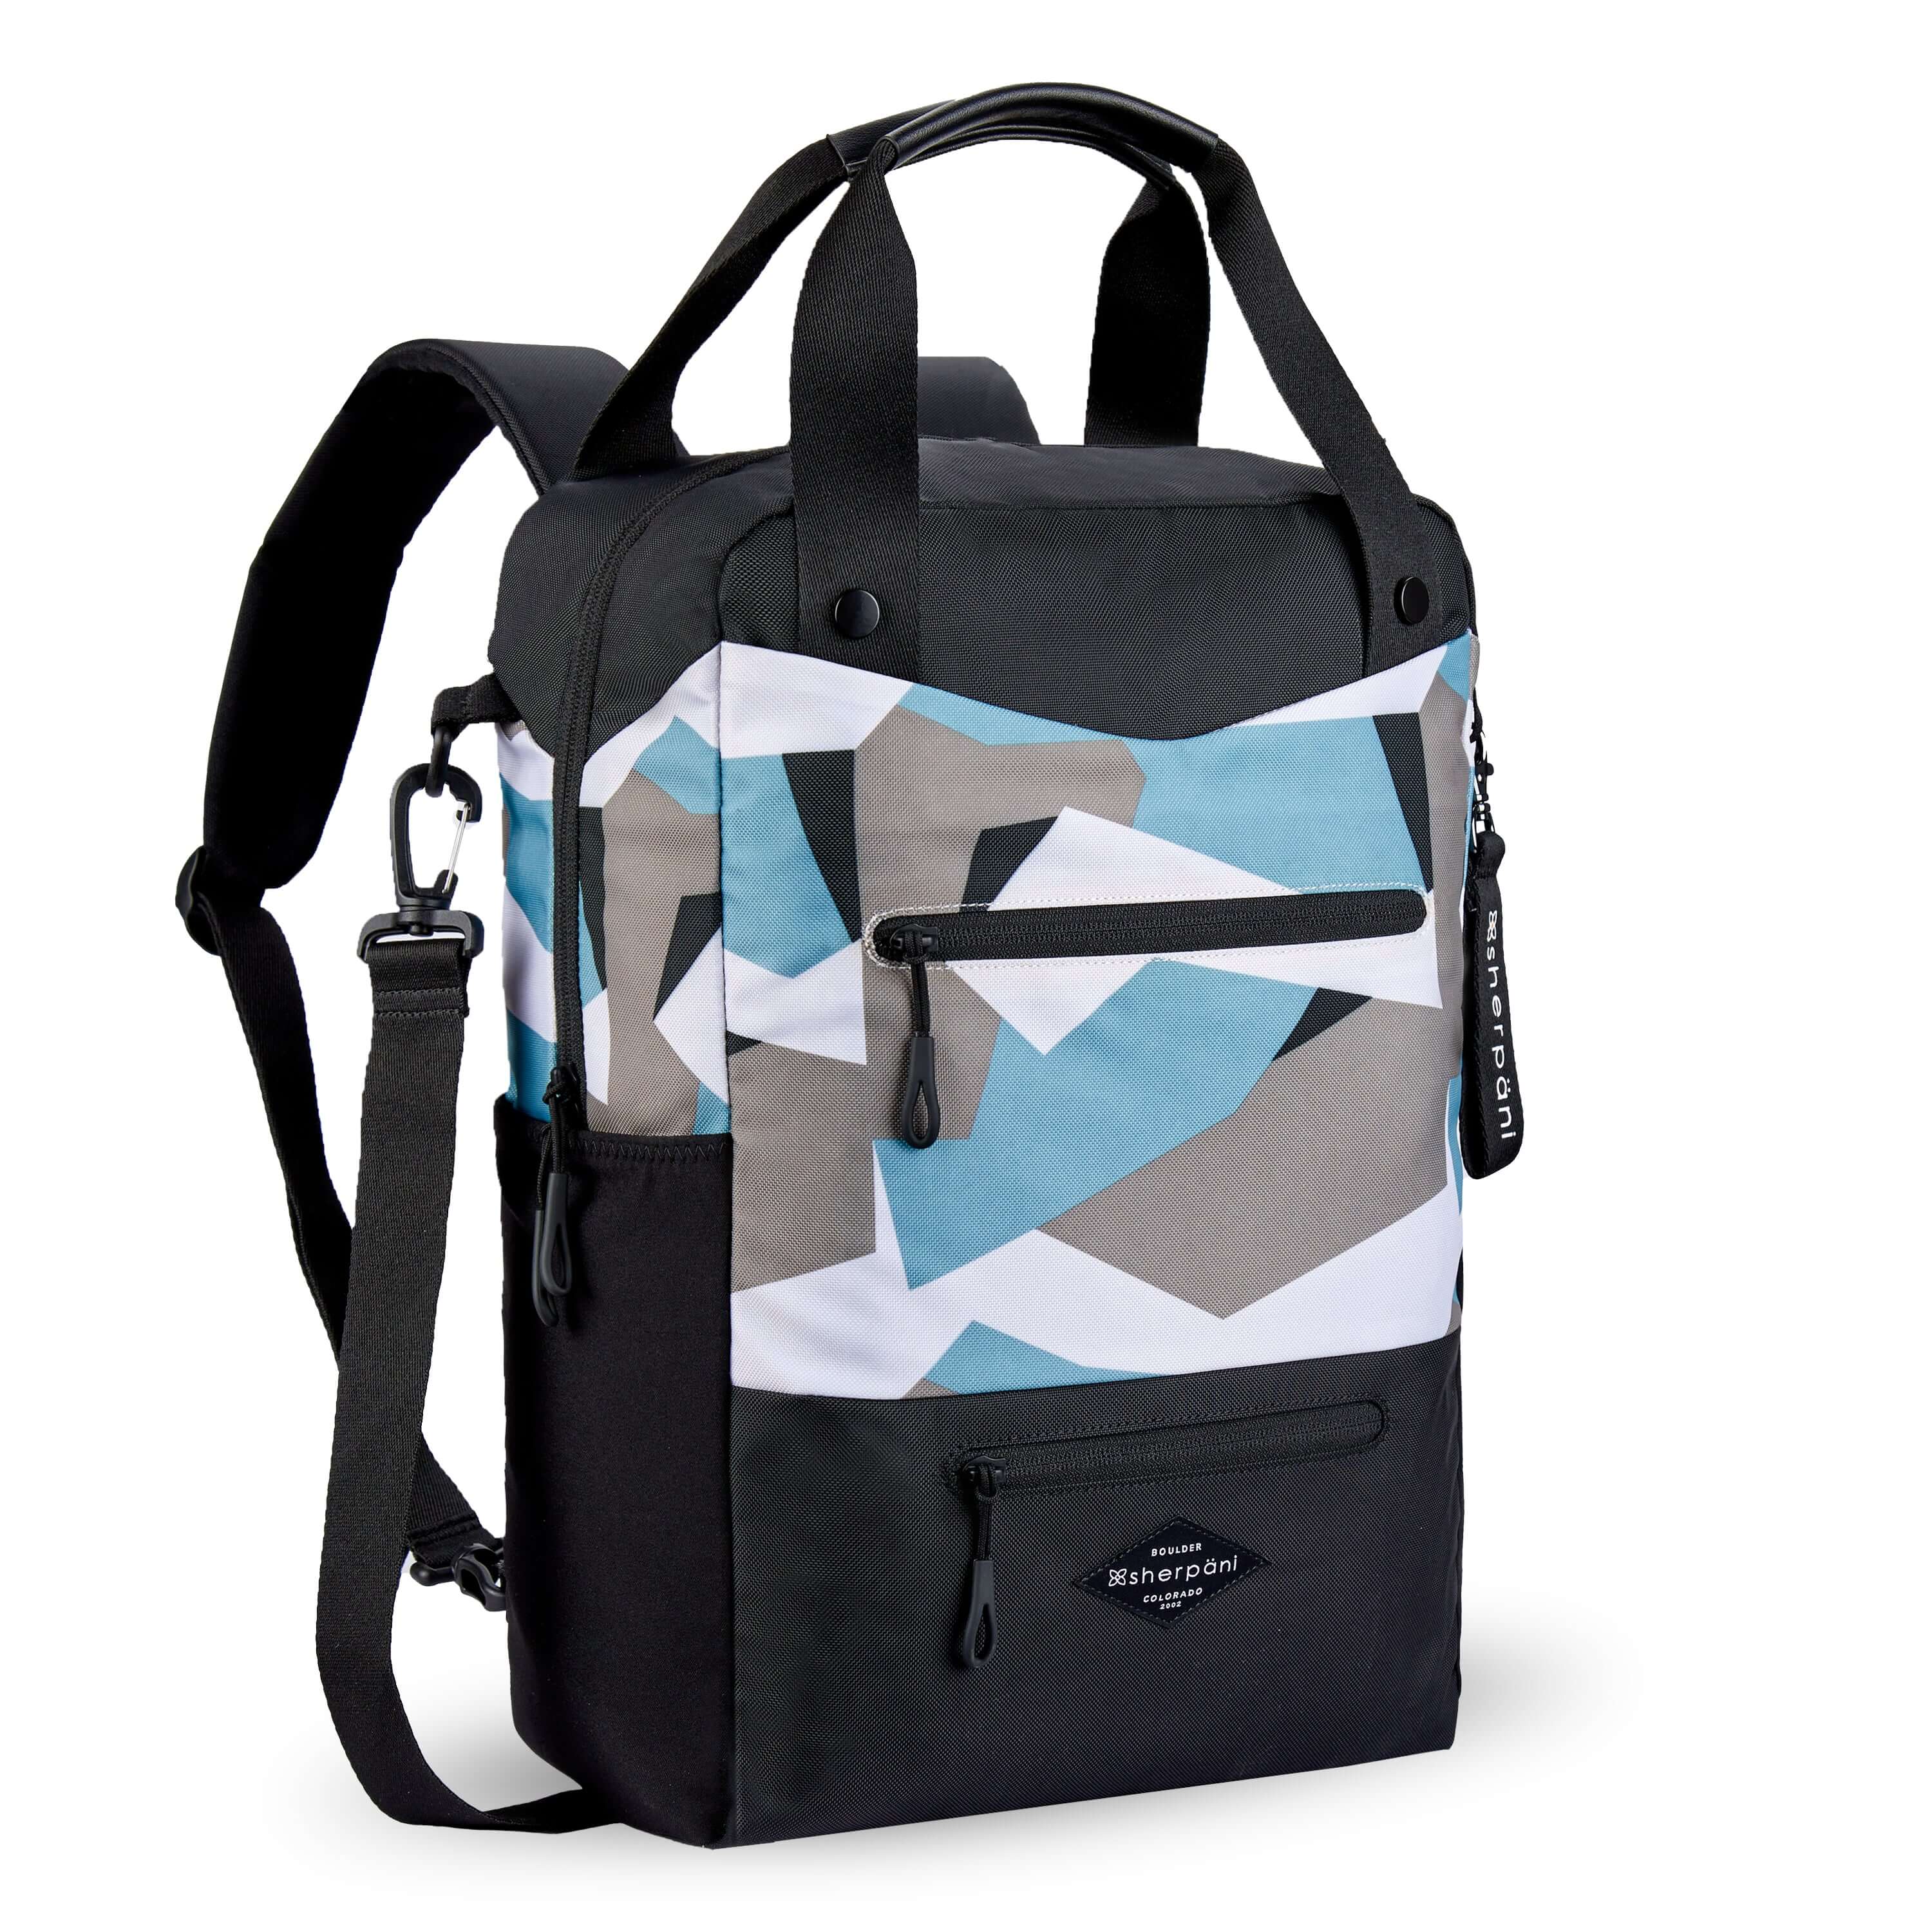 Angled front view of Sherpani&#39;s three-in-one bag, the Camden in Summer Camo. The bag is two-toned in black and in a camouflage pattern of blue, grey and white. There are two external zipper pockets on the front panel with easy-pull zippers in black. A branded Sherpani keychain is clipped to the upper right corner. An elastic water bottle holder sits on either side of the bag. The bag has an adjustable/detachable crossbody strap, padded/adjustable backpack straps and short tote handles fixed at the top.